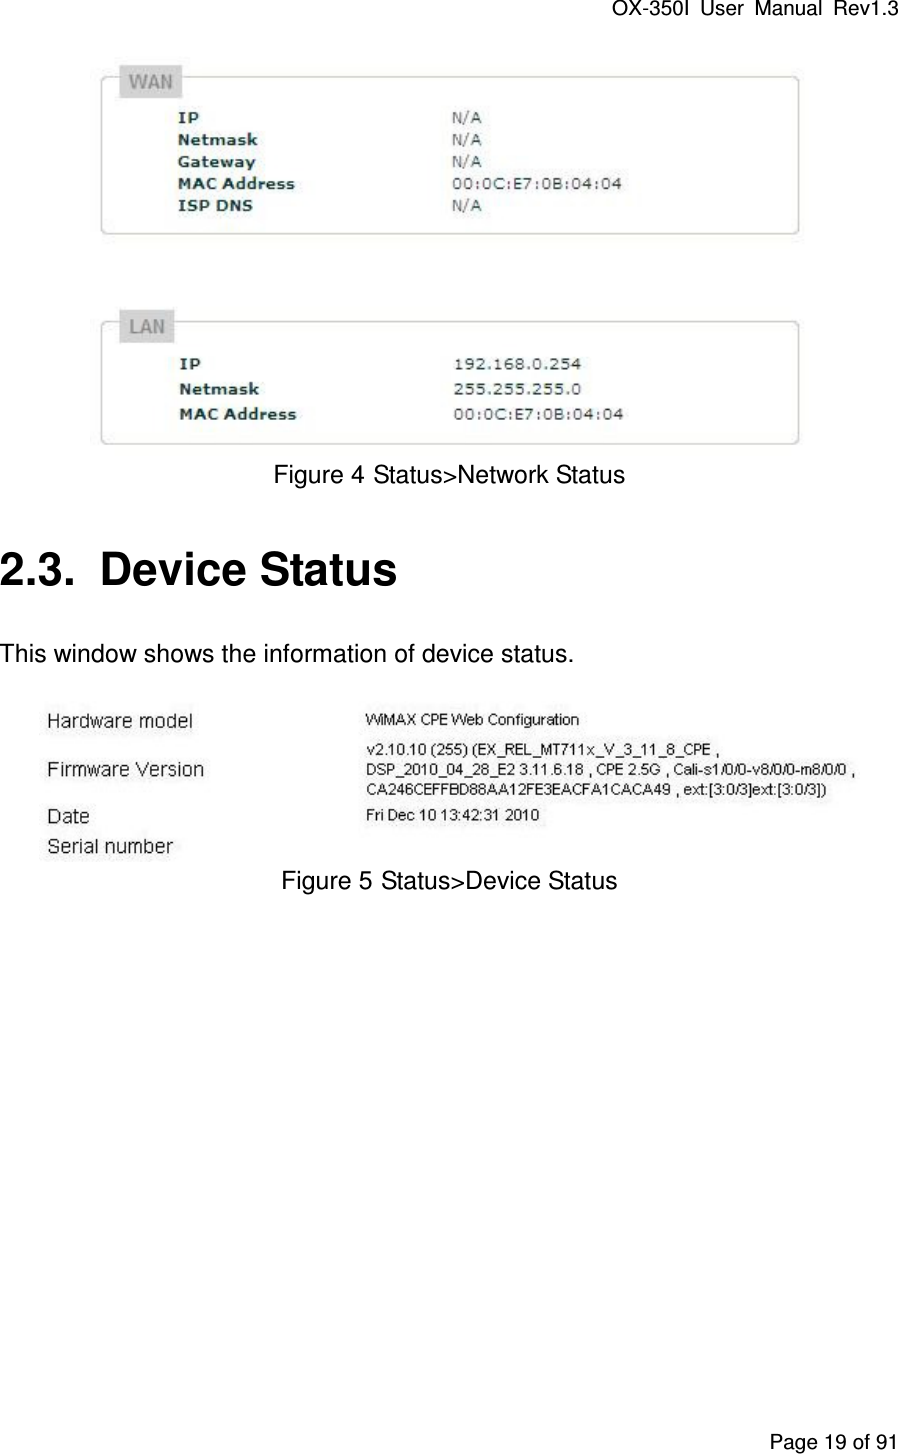 OX-350I  User  Manual  Rev1.3 Page 19 of 91  Figure 4 Status&gt;Network Status 2.3.  Device Status This window shows the information of device status.  Figure 5 Status&gt;Device Status 